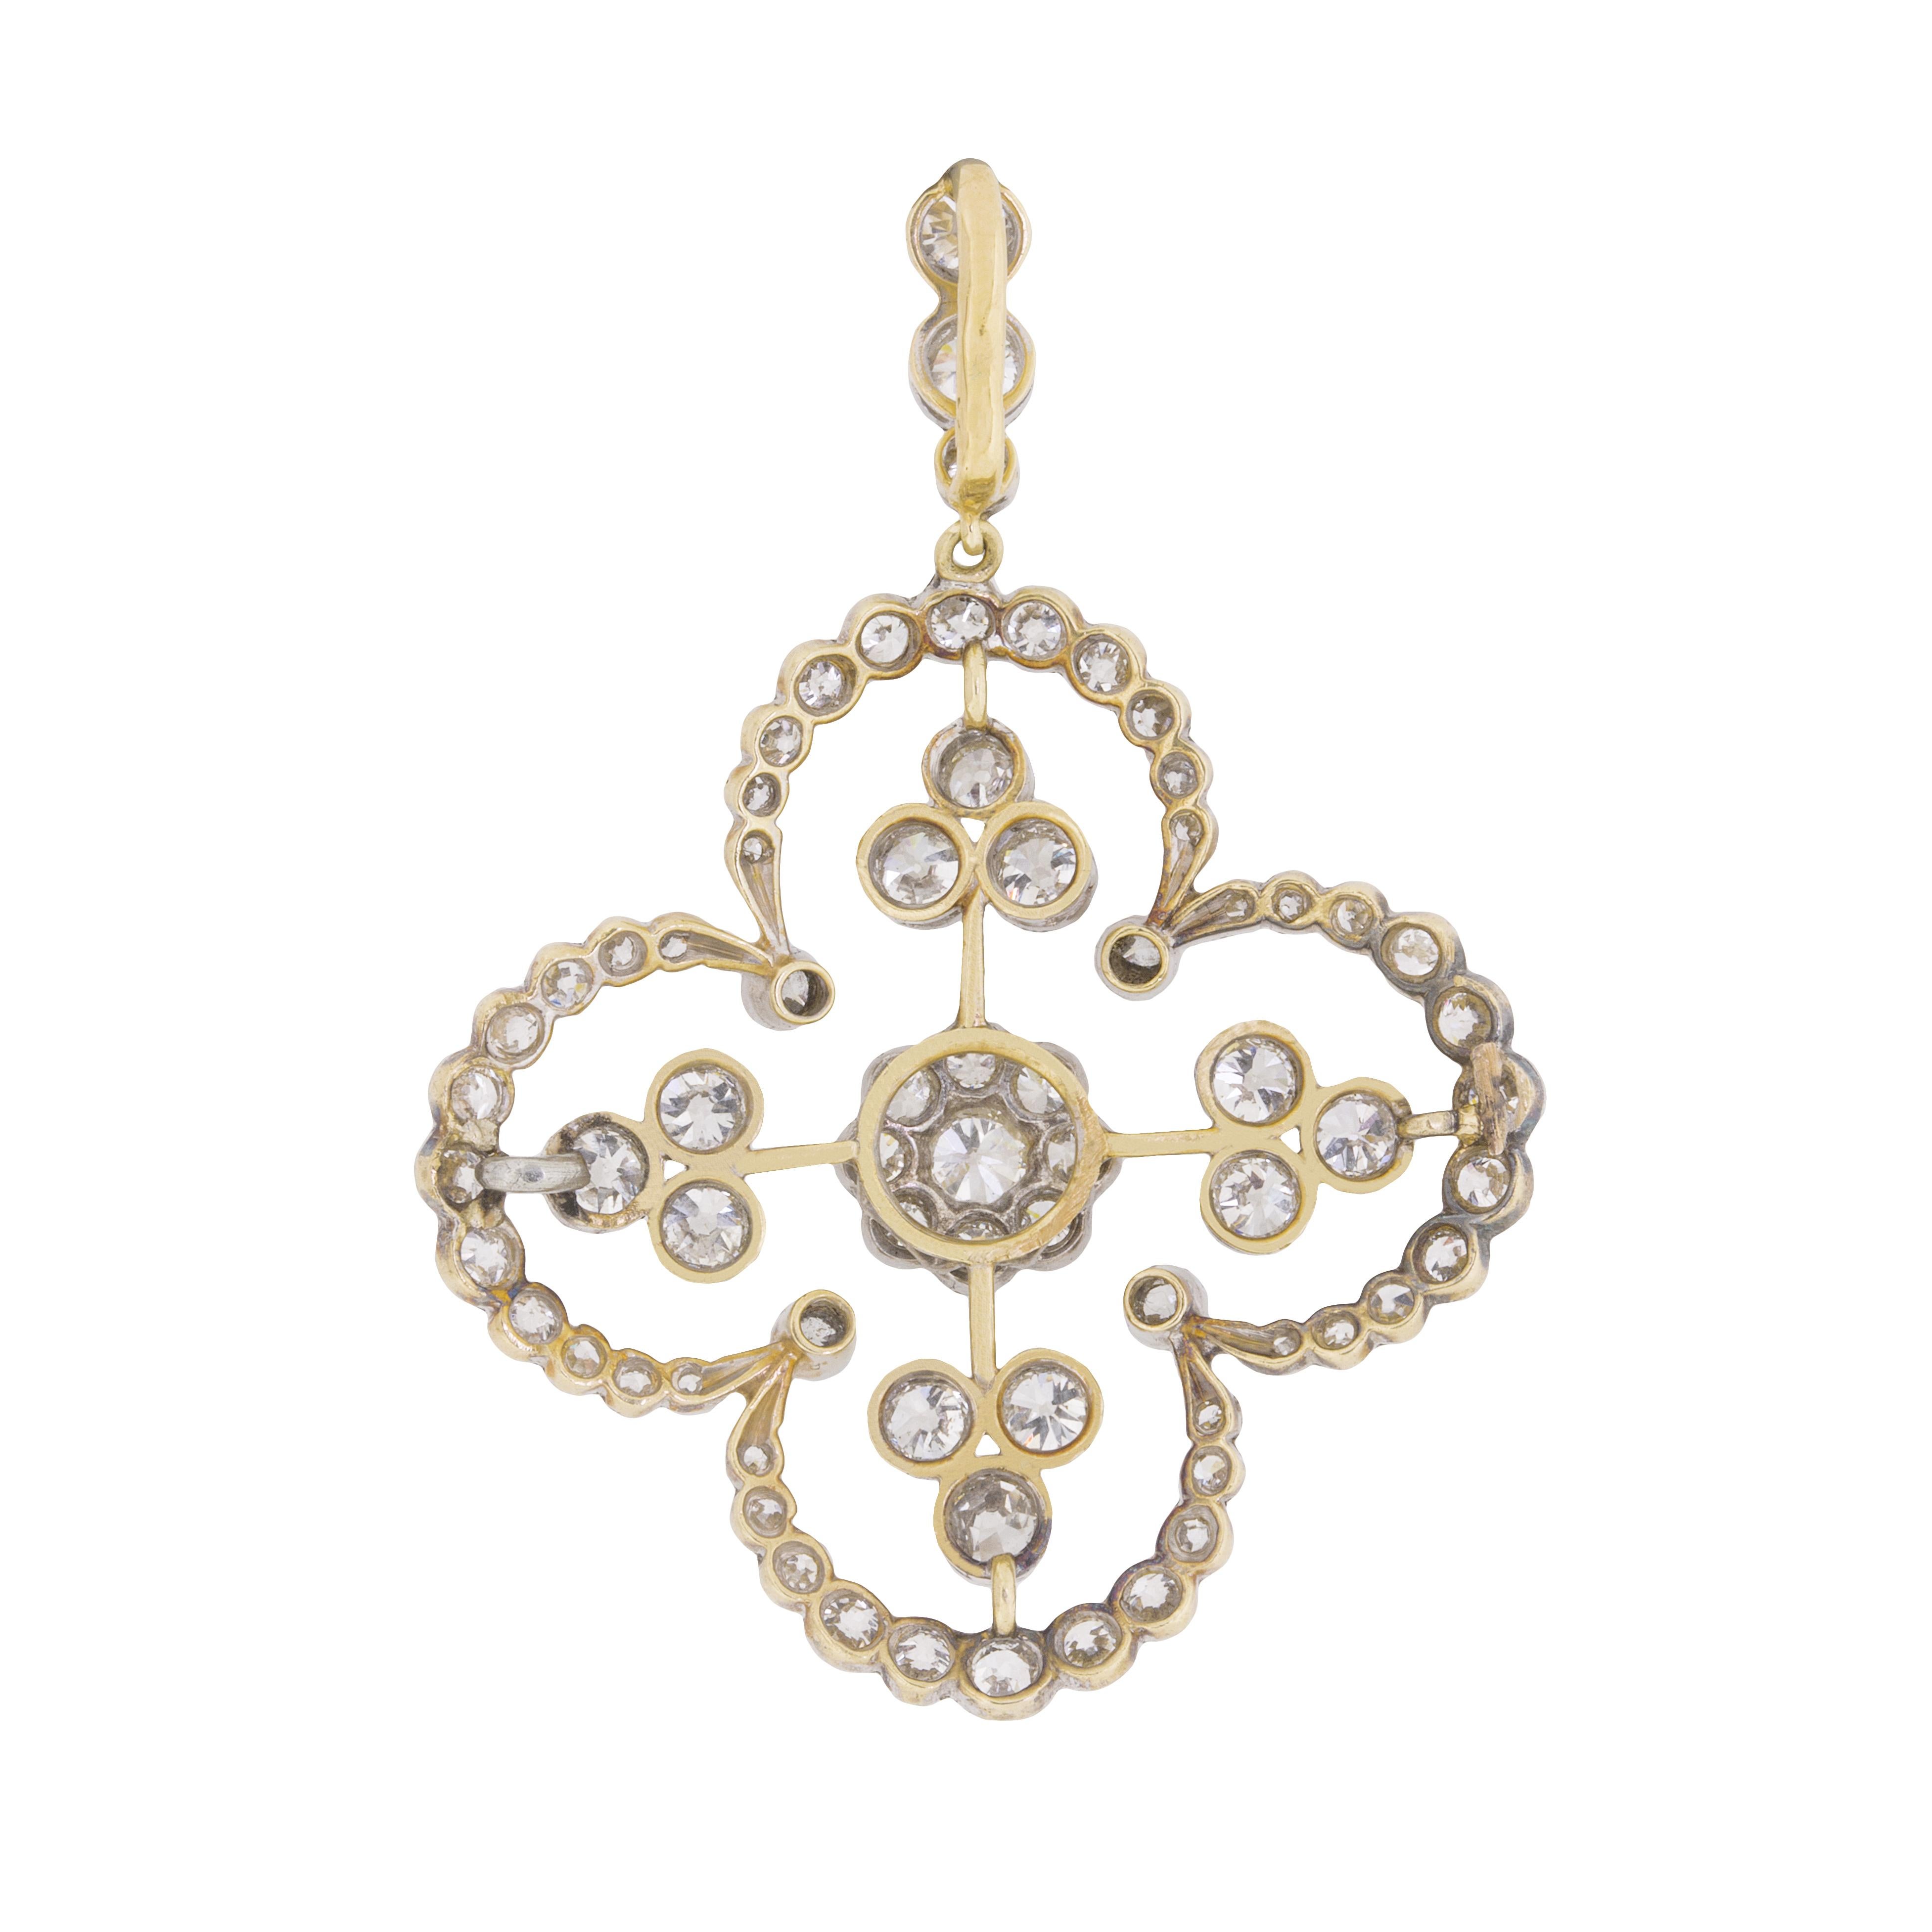 This stunning pendant features a total of 2.60 carat's worth of hand cut, old cut diamonds. They are beautifully crafted and estimated as F to G in colour, with a clarity of VS2. They have been wonderfully rub over set in a slight floral design,